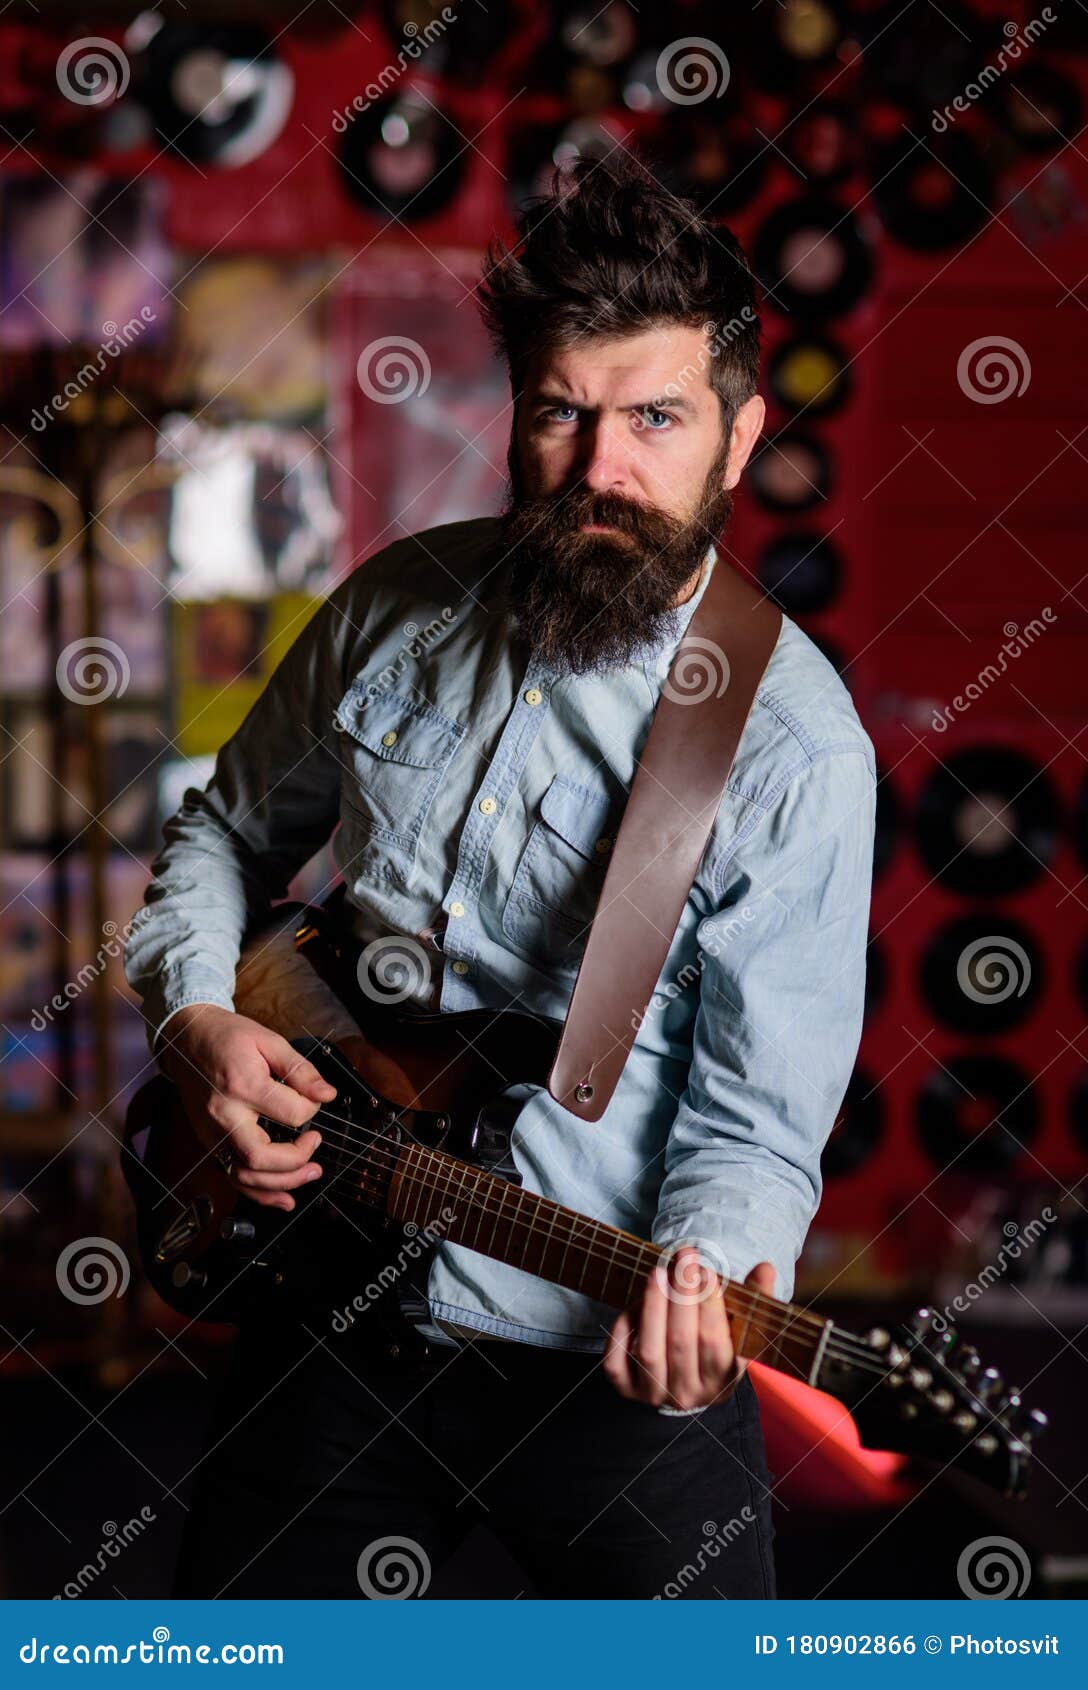 instrumentalist concept. musician with beard play electric guitar musical instrument.